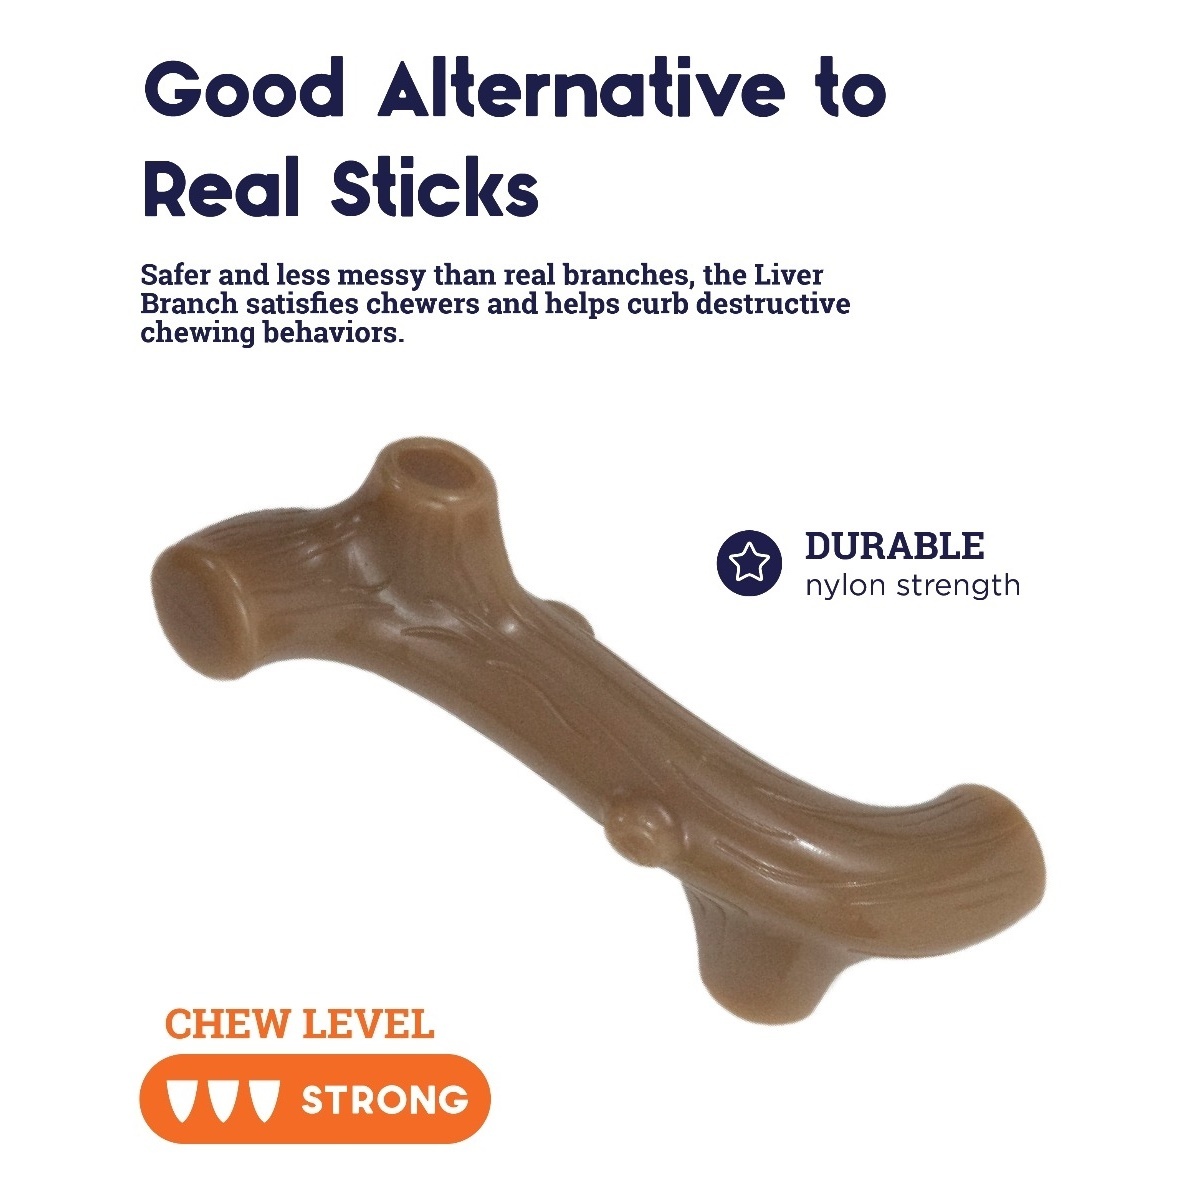 Petstages Liver Branch Flavoured Chew Stick for Dogs image 1